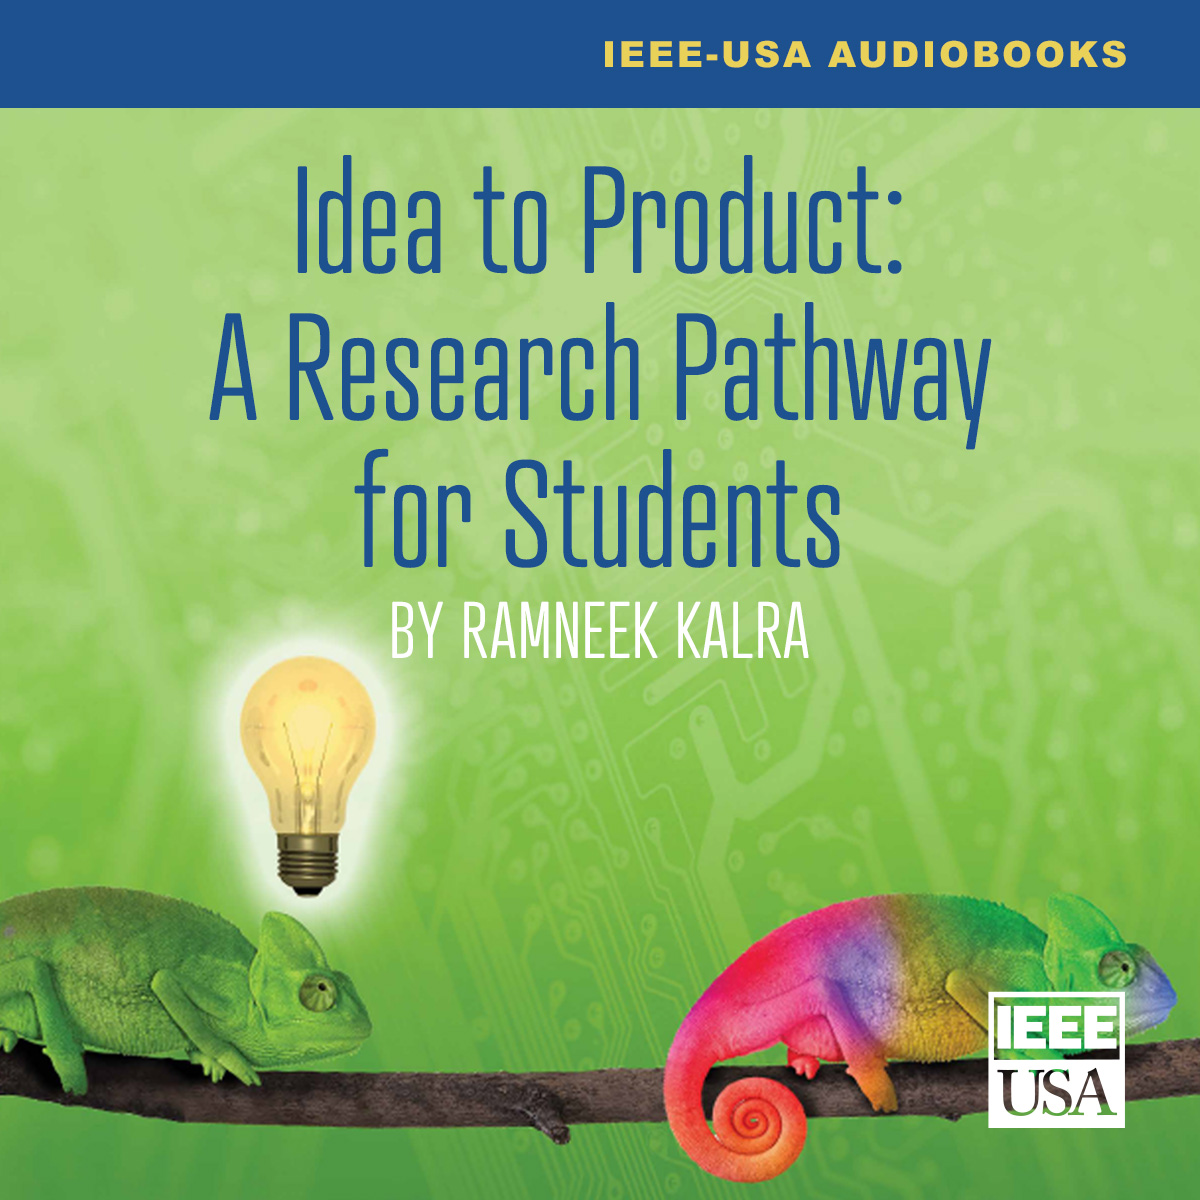 Audiobook: Idea to Product — A Research Pathway for Students